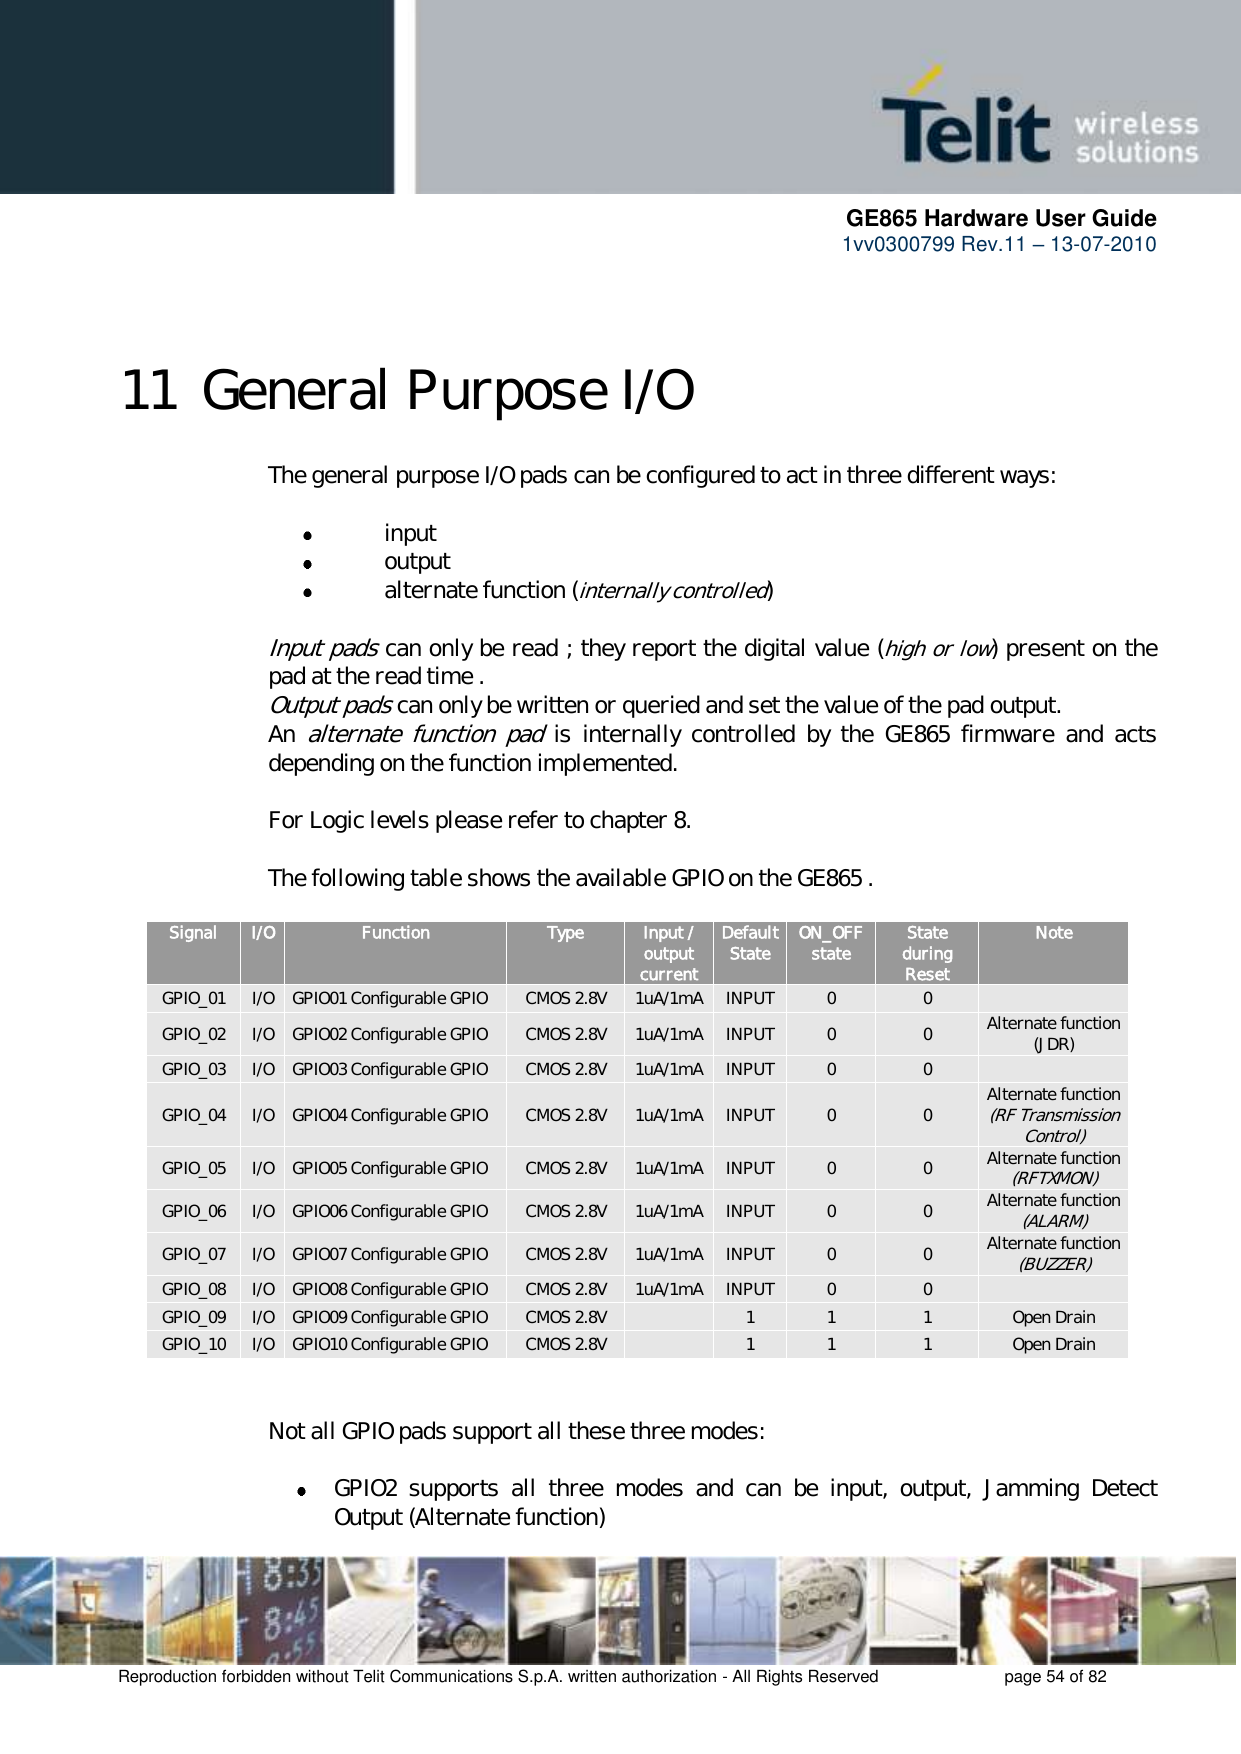      GE865 Hardware User Guide 1vv0300799 Rev.11 – 13-07-2010       Reproduction forbidden without Telit Communications S.p.A. written authorization - All Rights Reserved    page 54 of 82  11 General Purpose I/O The general purpose I/O pads can be configured to act in three different ways:   input  output  alternate function (internally controlled)  Input pads can only be read ; they report the digital value (high or low) present on the pad at the read time . Output pads can only be written or queried and set the value of the pad output. An alternate  function  pad  is  internally  controlled  by  the  GE865  firmware  and  acts depending on the function implemented.    For Logic levels please refer to chapter 8.  The following table shows the available GPIO on the GE865 .  Signal I/O Function Type Input / output current Default State ON_OFF state State during Reset Note GPIO_01 I/O GPIO01 Configurable GPIO CMOS 2.8V 1uA/1mA INPUT 0 0  GPIO_02 I/O GPIO02 Configurable GPIO CMOS 2.8V 1uA/1mA INPUT 0 0 Alternate function  (JDR) GPIO_03 I/O GPIO03 Configurable GPIO CMOS 2.8V 1uA/1mA INPUT 0 0  GPIO_04 I/O GPIO04 Configurable GPIO CMOS 2.8V 1uA/1mA INPUT 0 0 Alternate function  (RF Transmission Control) GPIO_05 I/O GPIO05 Configurable GPIO CMOS 2.8V 1uA/1mA INPUT 0 0 Alternate function (RFTXMON) GPIO_06 I/O GPIO06 Configurable GPIO CMOS 2.8V 1uA/1mA INPUT 0 0 Alternate function (ALARM) GPIO_07 I/O GPIO07 Configurable GPIO CMOS 2.8V 1uA/1mA INPUT 0 0 Alternate function (BUZZER) GPIO_08 I/O GPIO08 Configurable GPIO CMOS 2.8V 1uA/1mA INPUT 0 0  GPIO_09 I/O GPIO09 Configurable GPIO CMOS 2.8V  1 1 1 Open Drain GPIO_10 I/O GPIO10 Configurable GPIO CMOS 2.8V  1 1 1 Open Drain   Not all GPIO pads support all these three modes:   GPIO2  supports  all  three  modes  and  can  be  input,  output,  Jamming  Detect Output (Alternate function) 